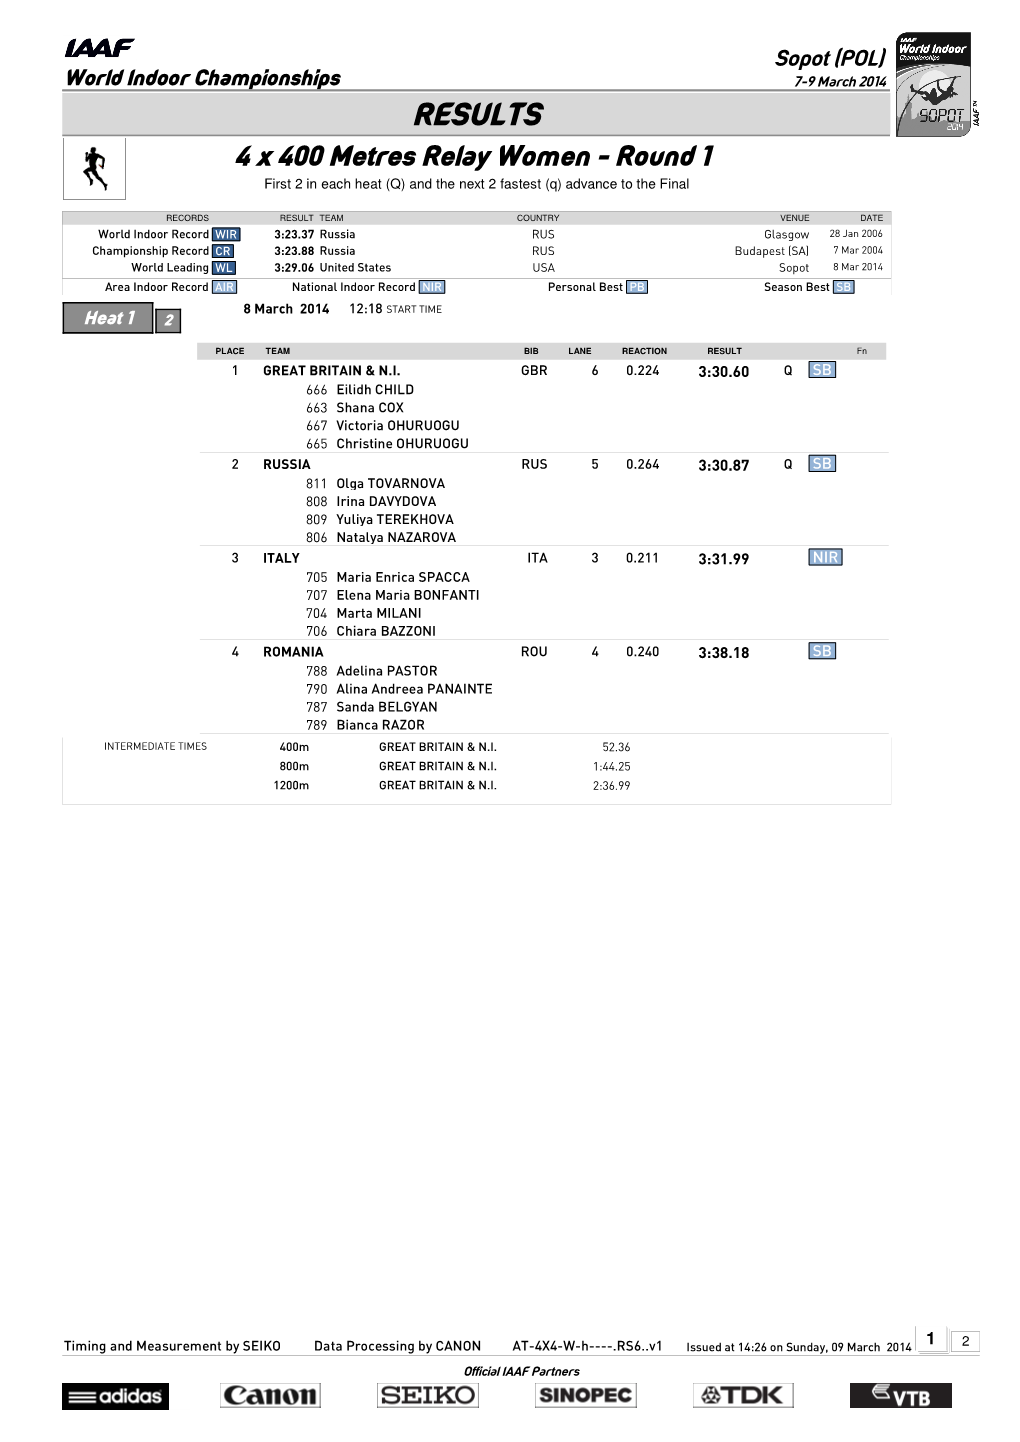 RESULTS 4 X 400 Metres Relay Women - Round 1 First 2 in Each Heat (Q) and the Next 2 Fastest (Q) Advance to the Final